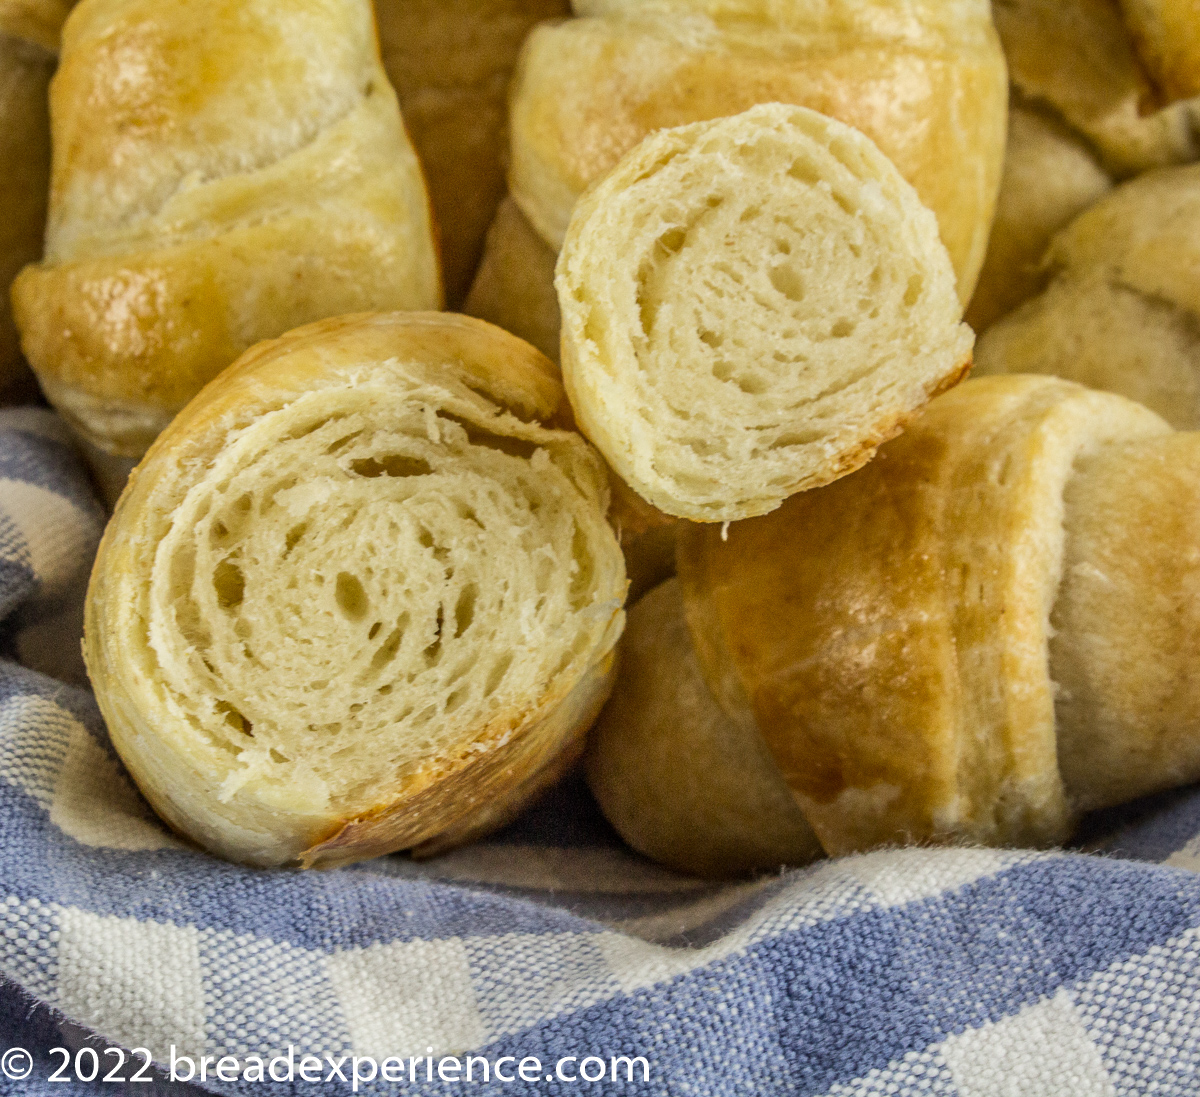 Sourdough Crescent Rolls - sliced to reveal layers